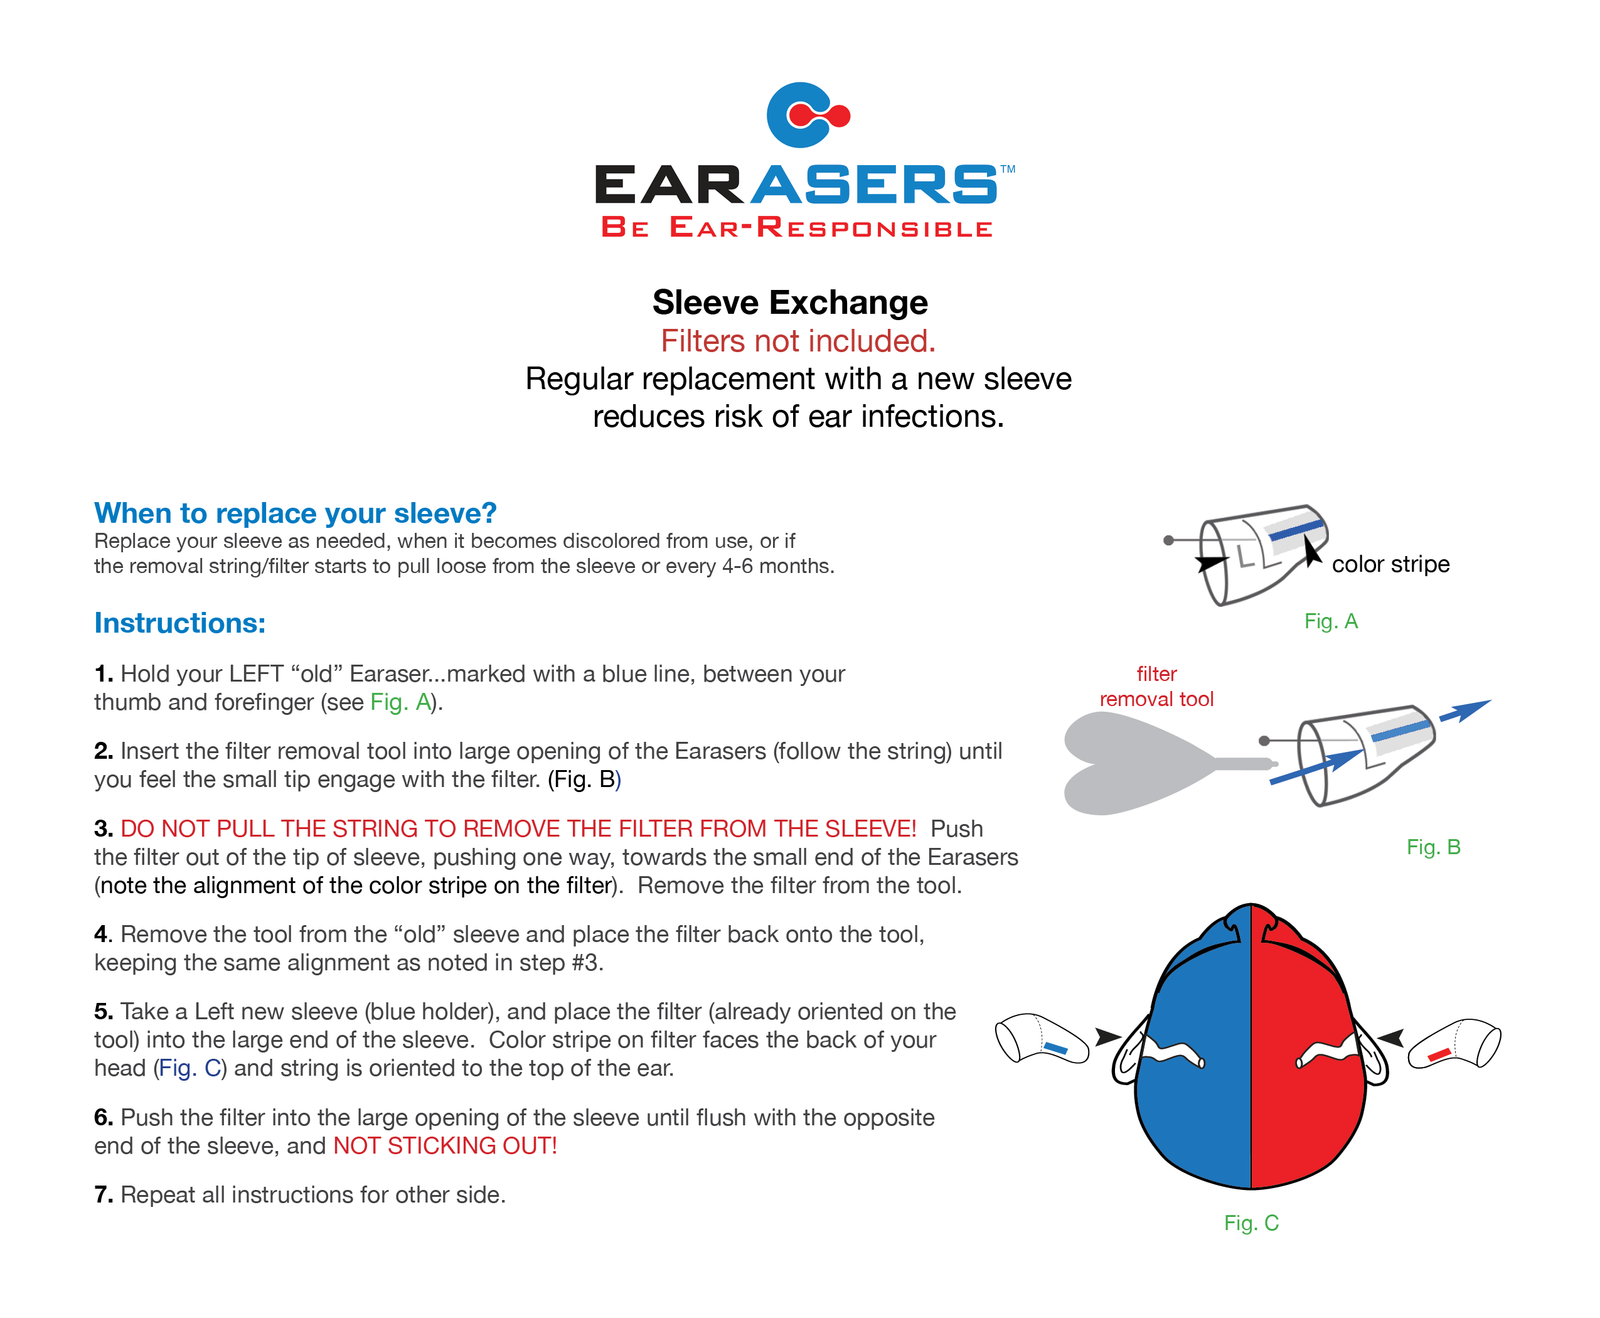 Earasers renewal kit instructions